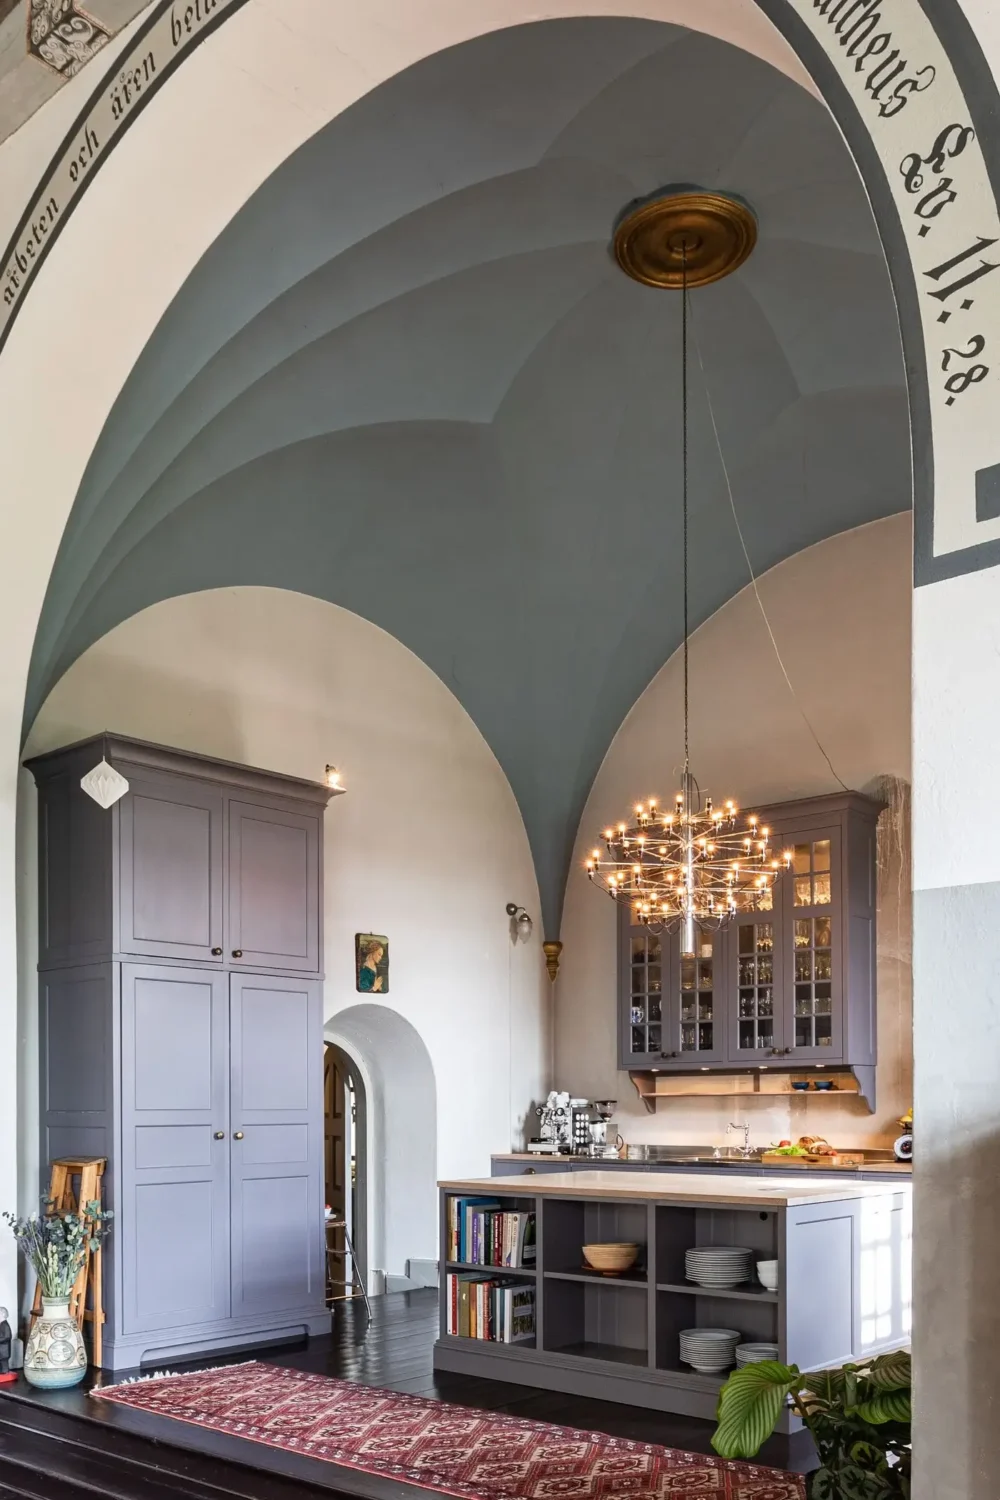 kitchen-arched-ceiling-church-conversion-sweden-nordroom